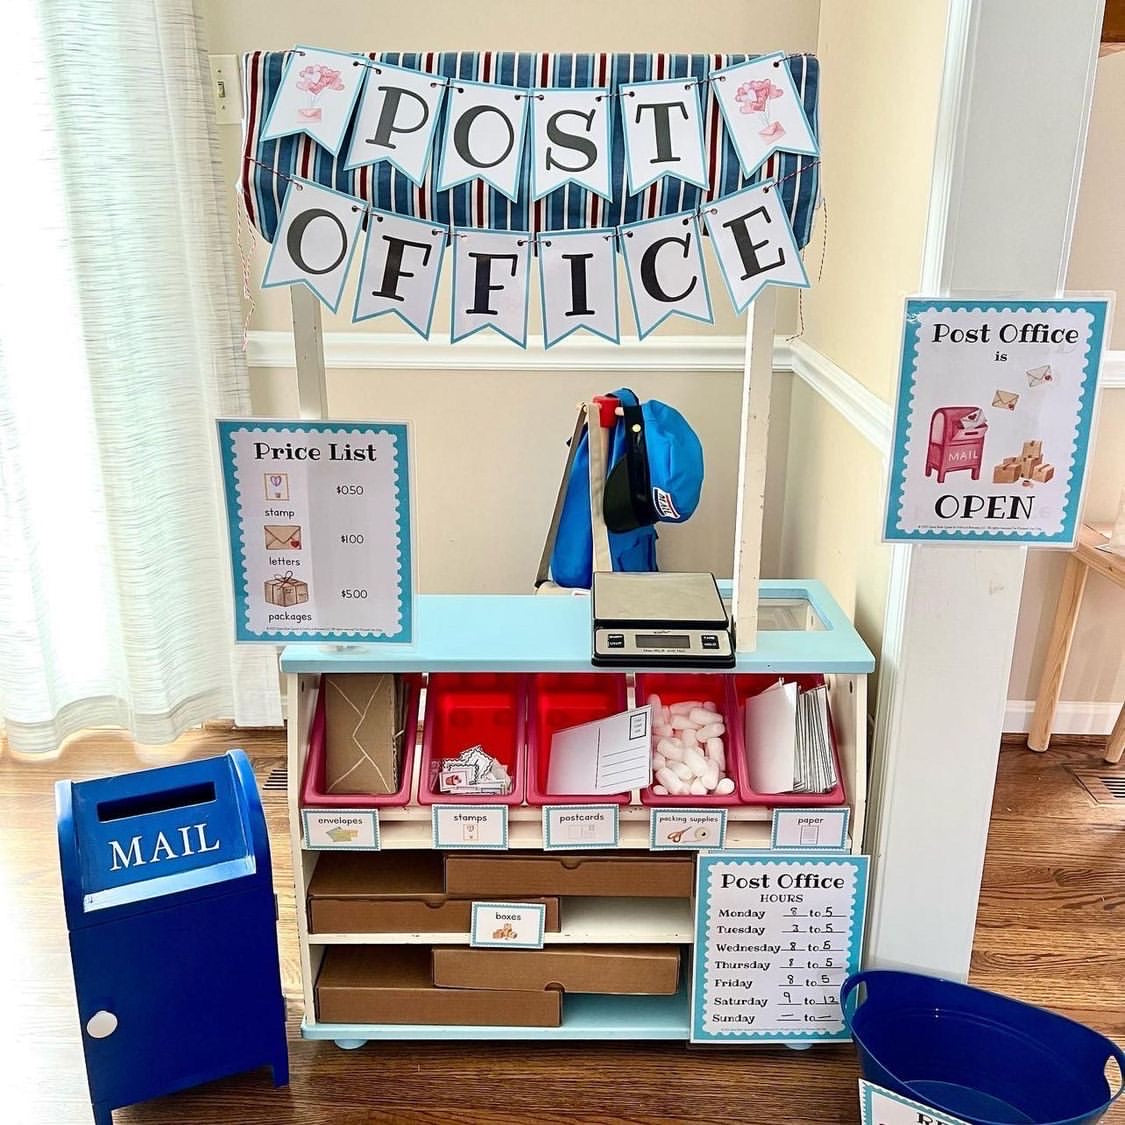 A pretend play post office set up.